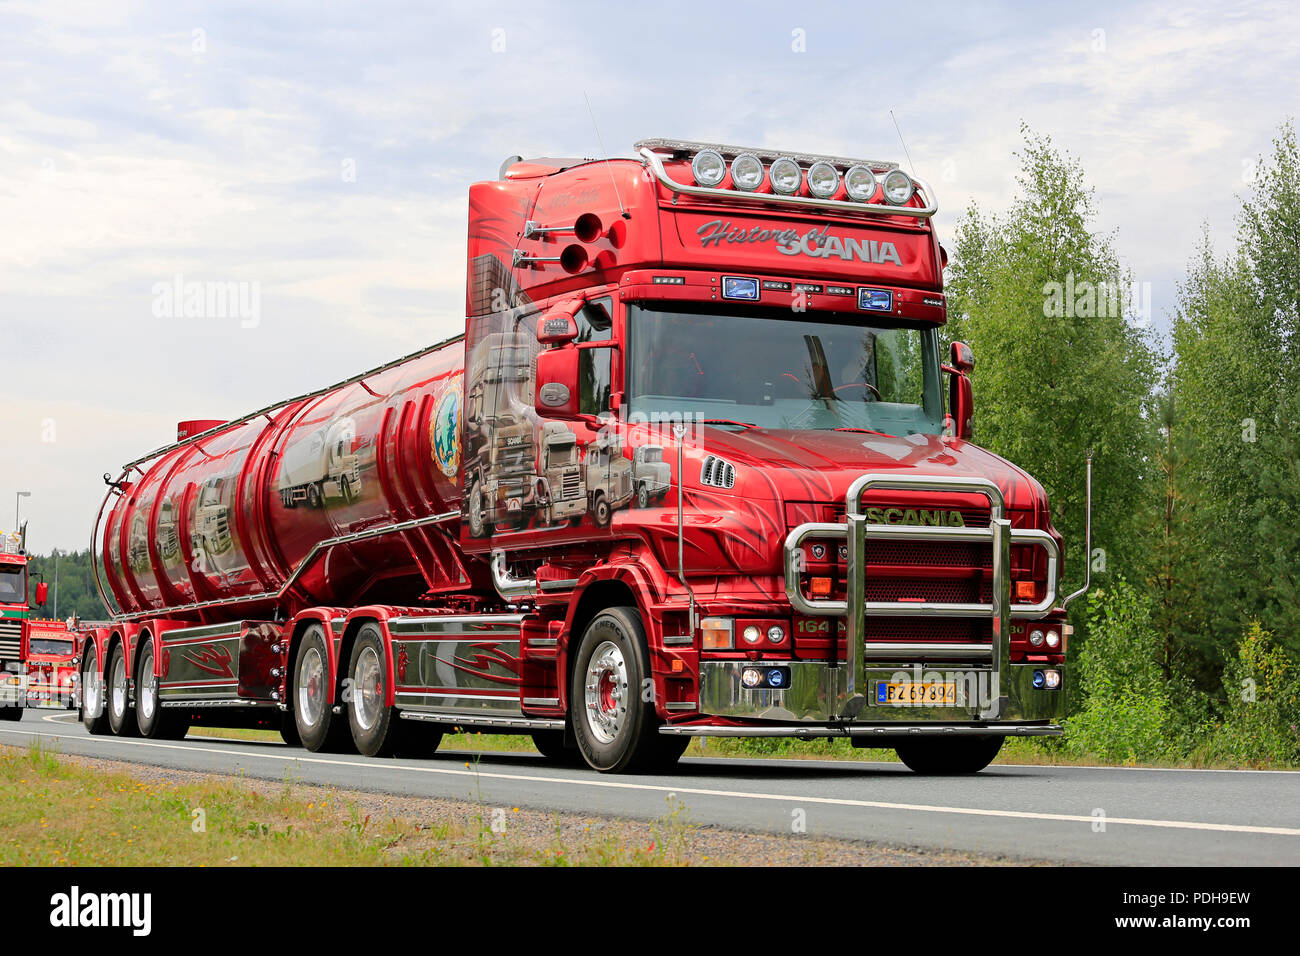 LEMPAALA, FINLAND - AUGUST 9, 2018: Scania T164 super truck History of Scania Pouls Bremseservice A/S on truck convoy to the leading trucking event Power Truck Show 2018, Finland. Credit: Taina Sohlman/ Alamy Live News Stock Photo